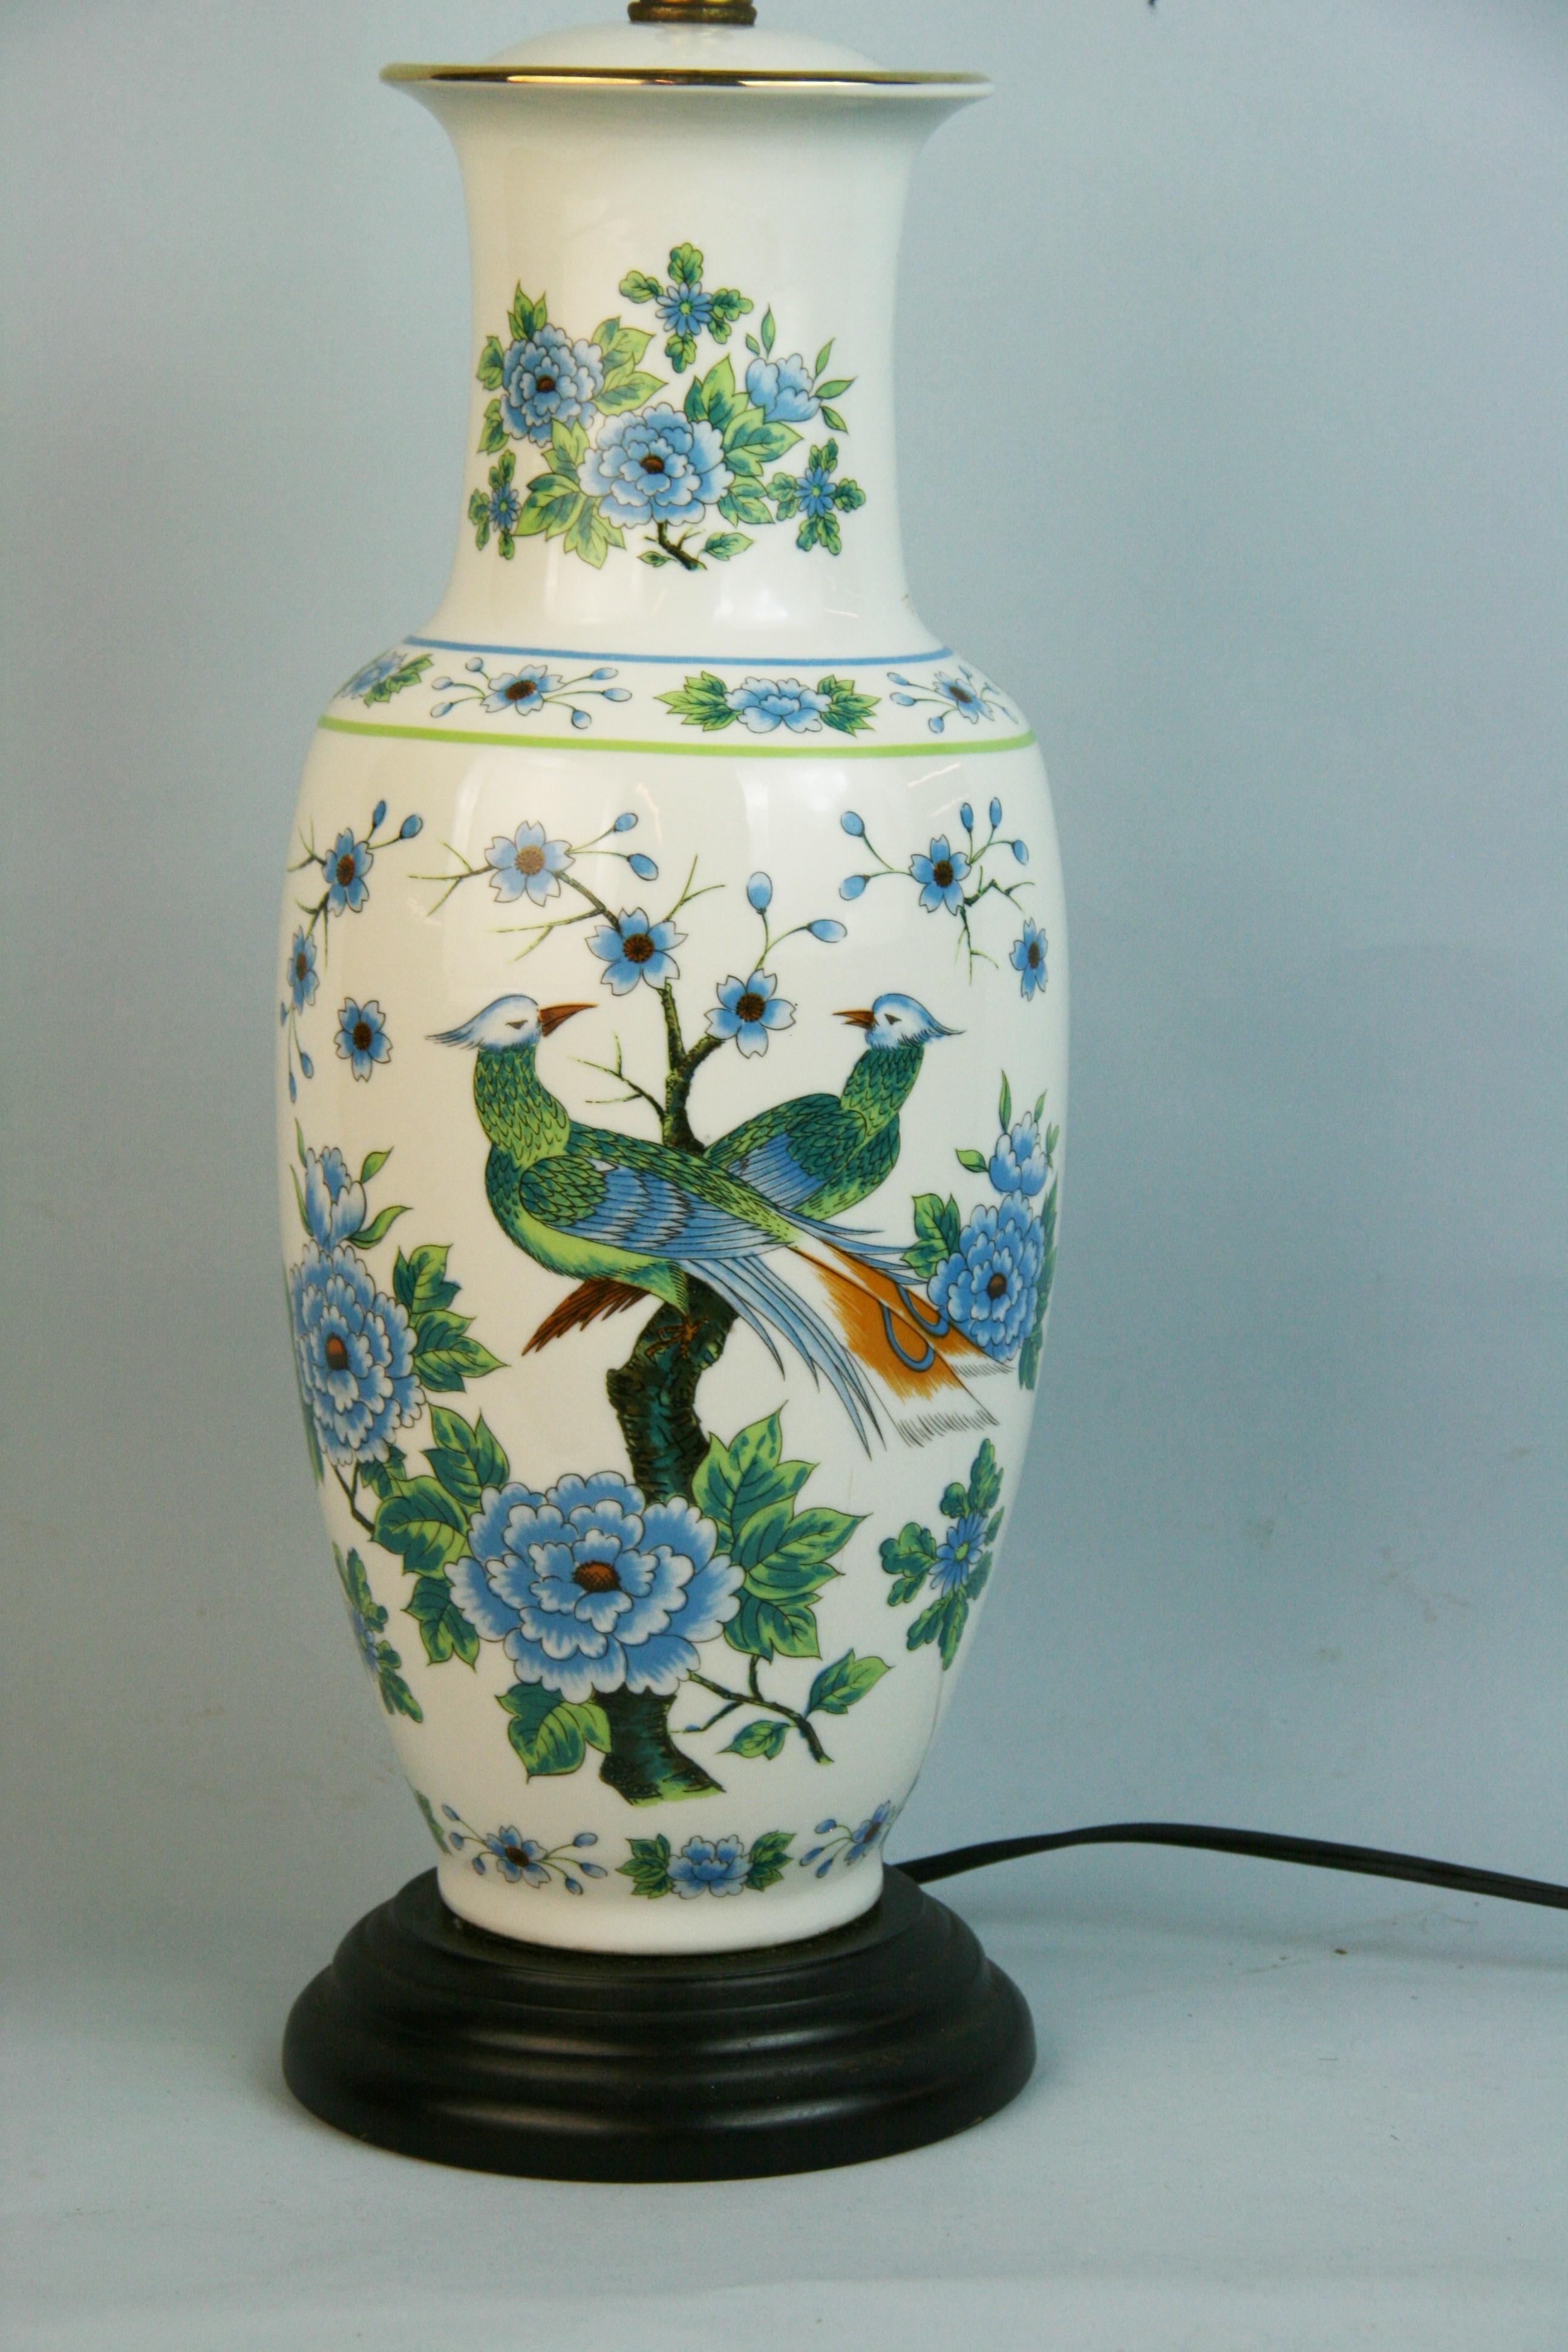 1301 Japanese hand painted birds and flowers lamp
Height 21